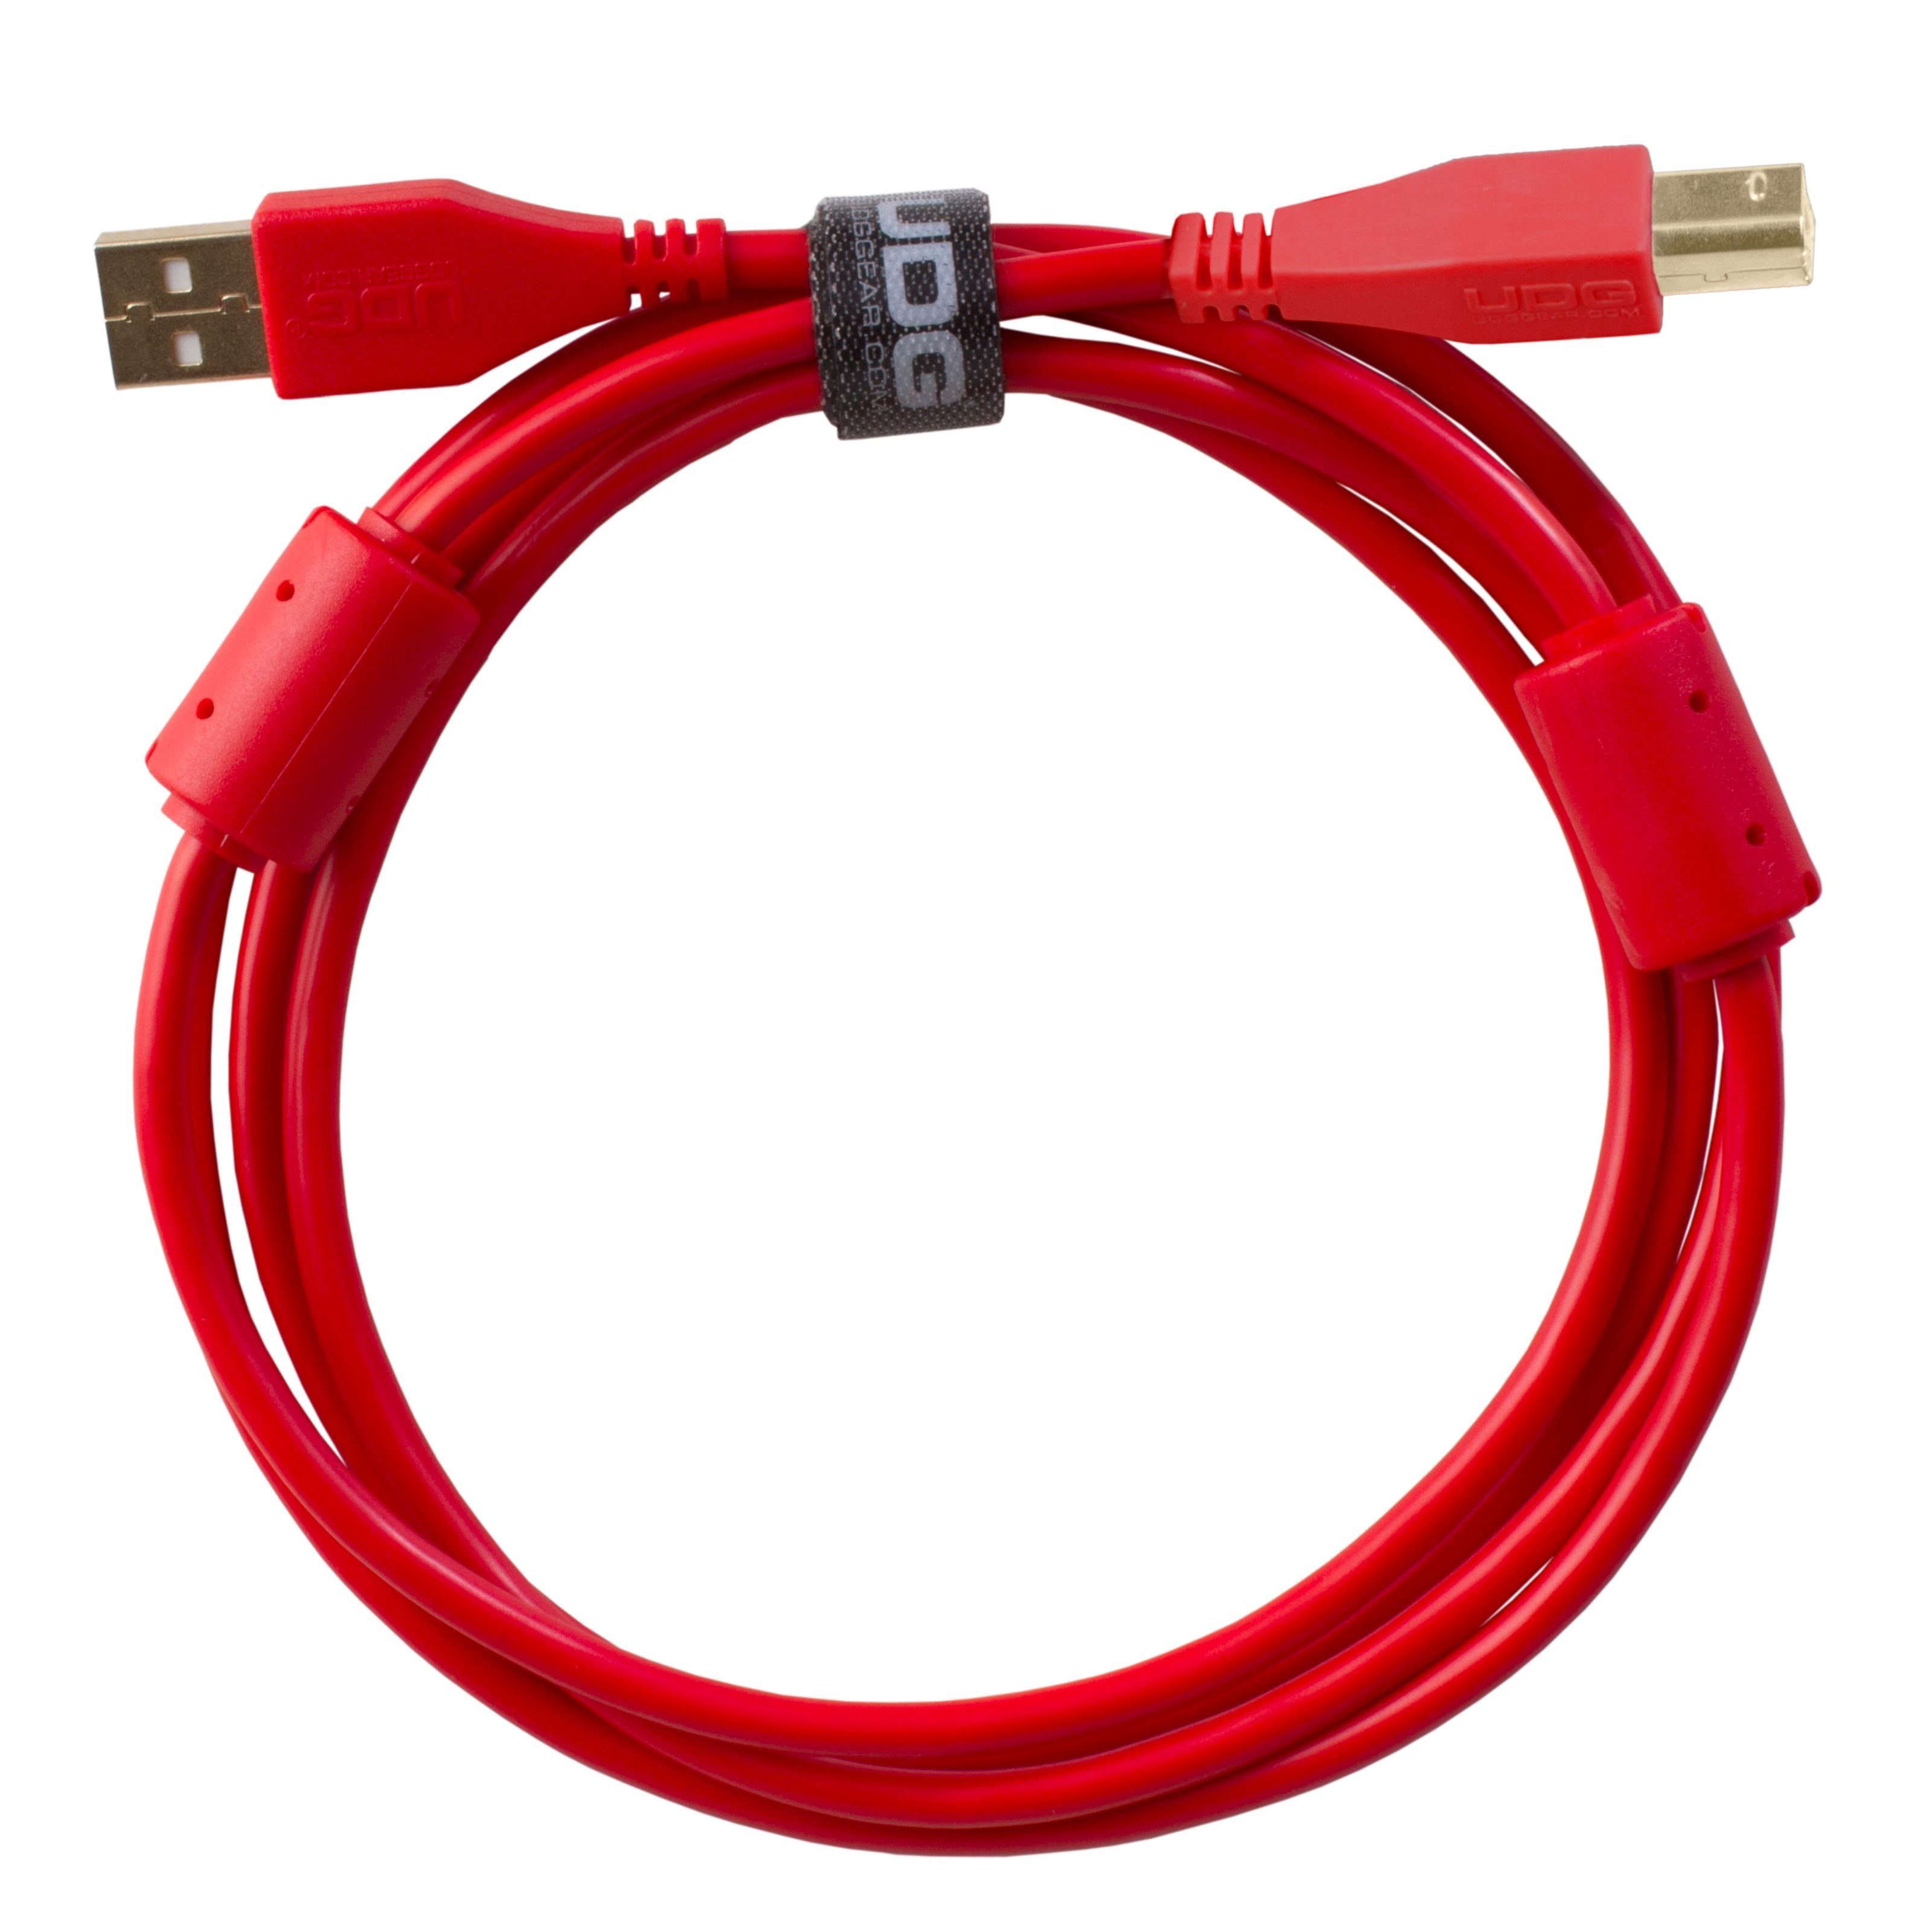 UDG Audio-Kabel, Ultimate Audio Cable USB 2.0 A-B Red Straight 3m (U95003RD) - Kabel